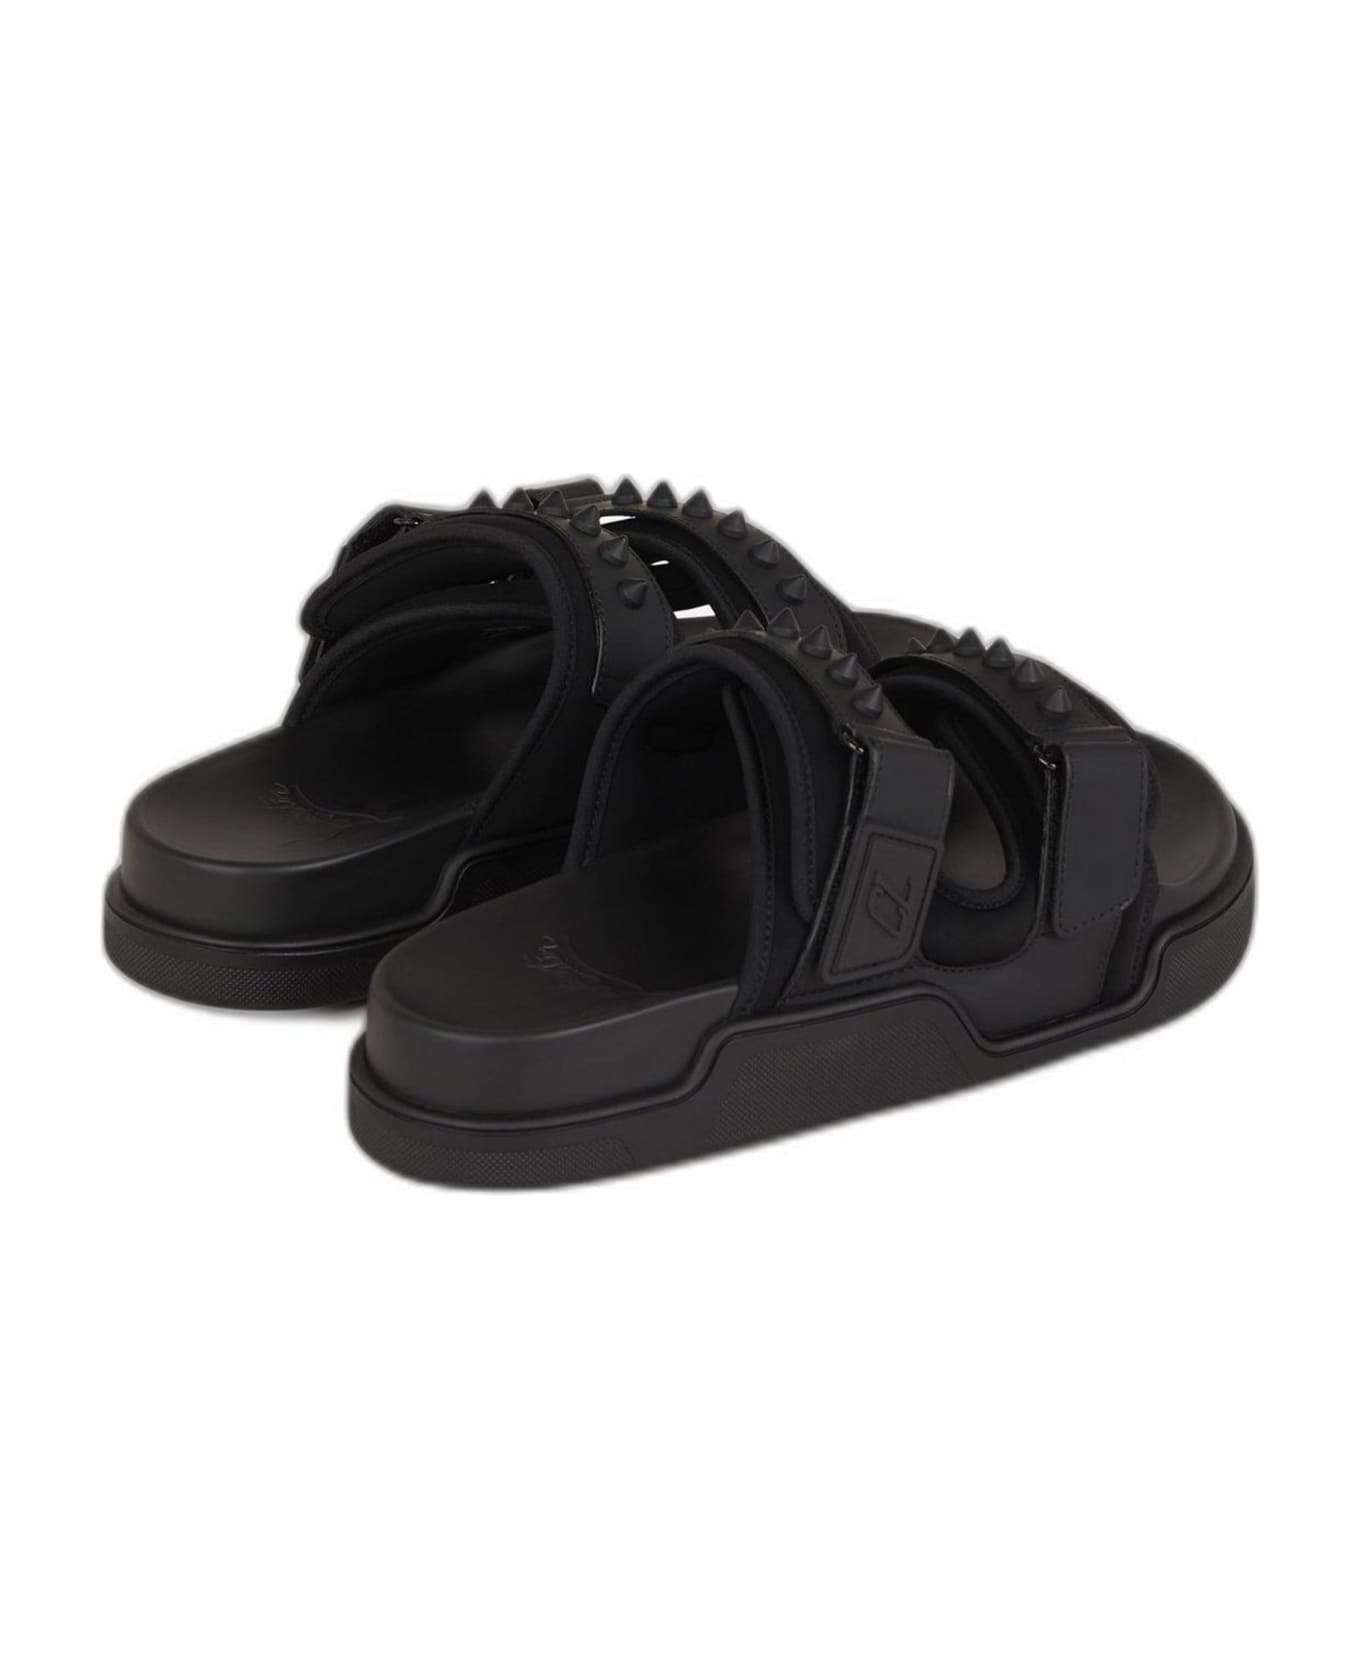 Christian Louboutin Leather Velcro Sandals - Black その他各種シューズ